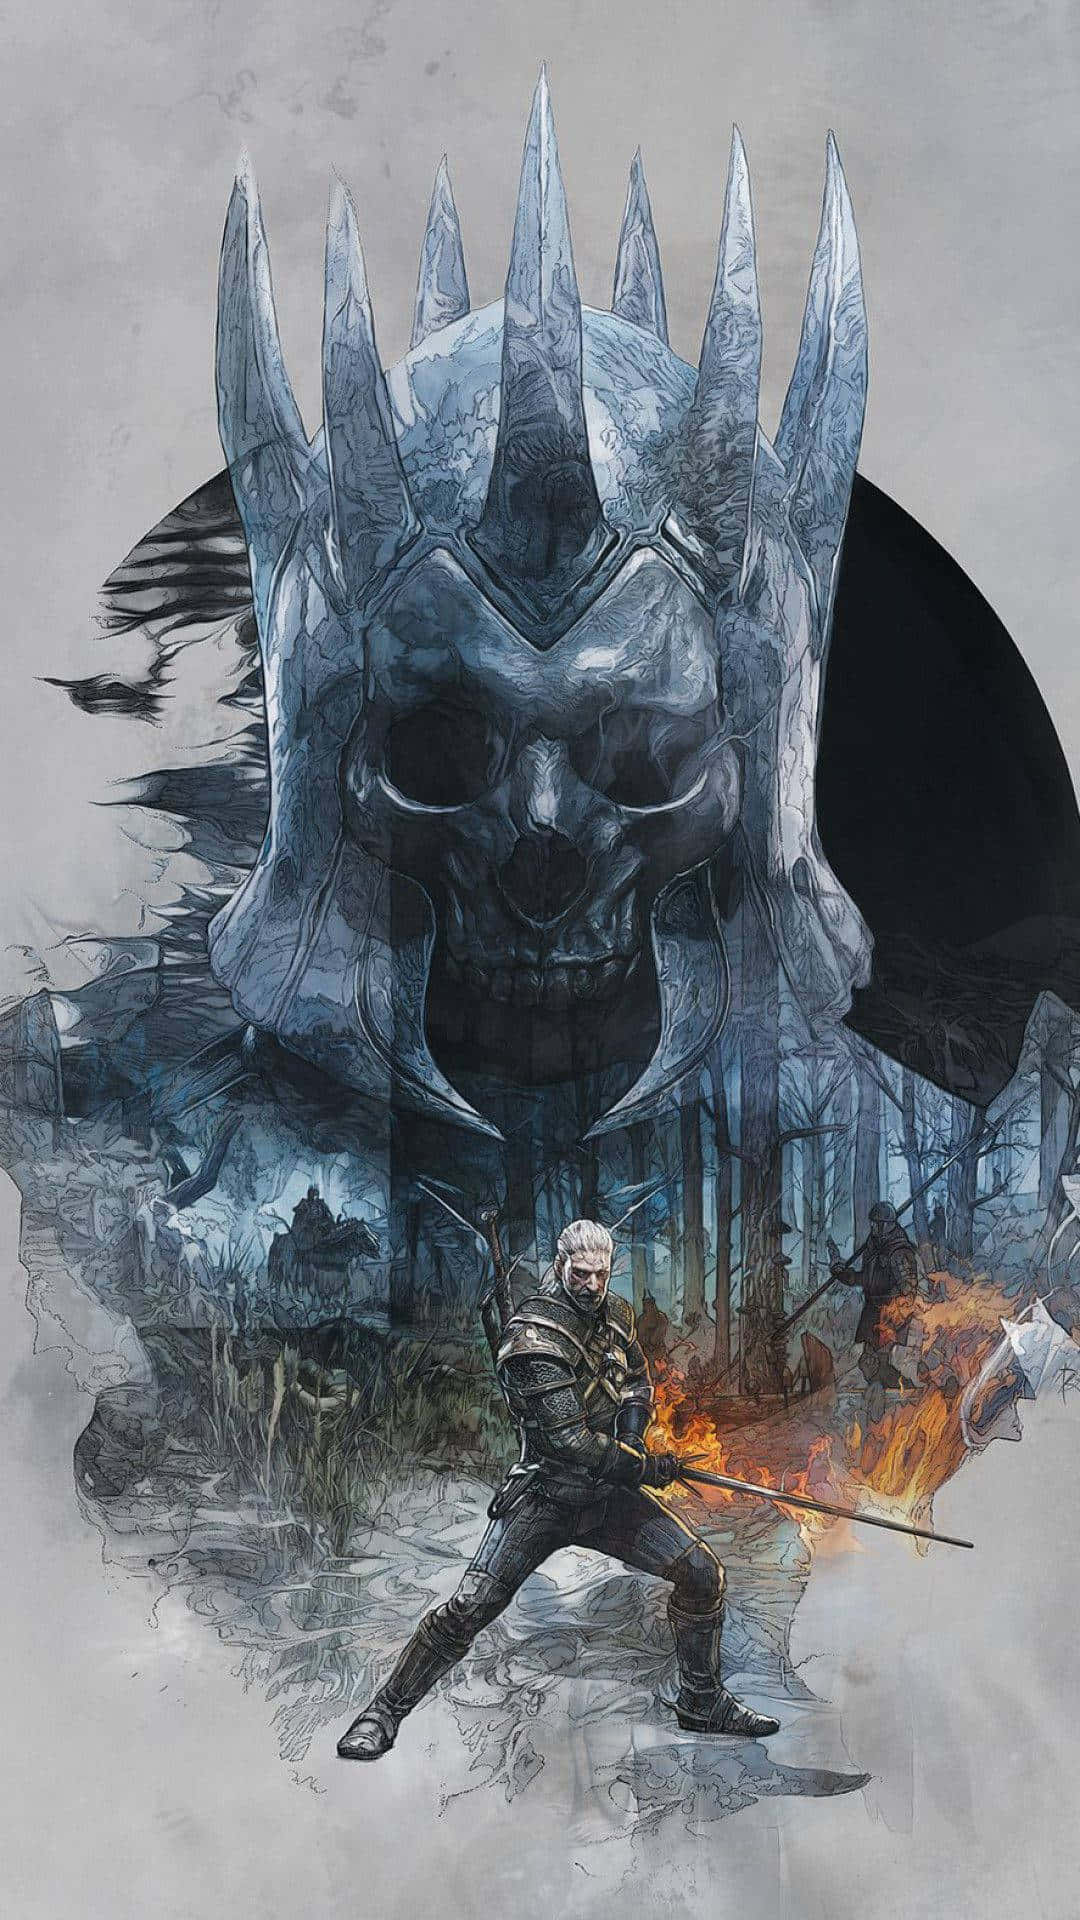 Unearthly adventures await in the world of Witcher 3.